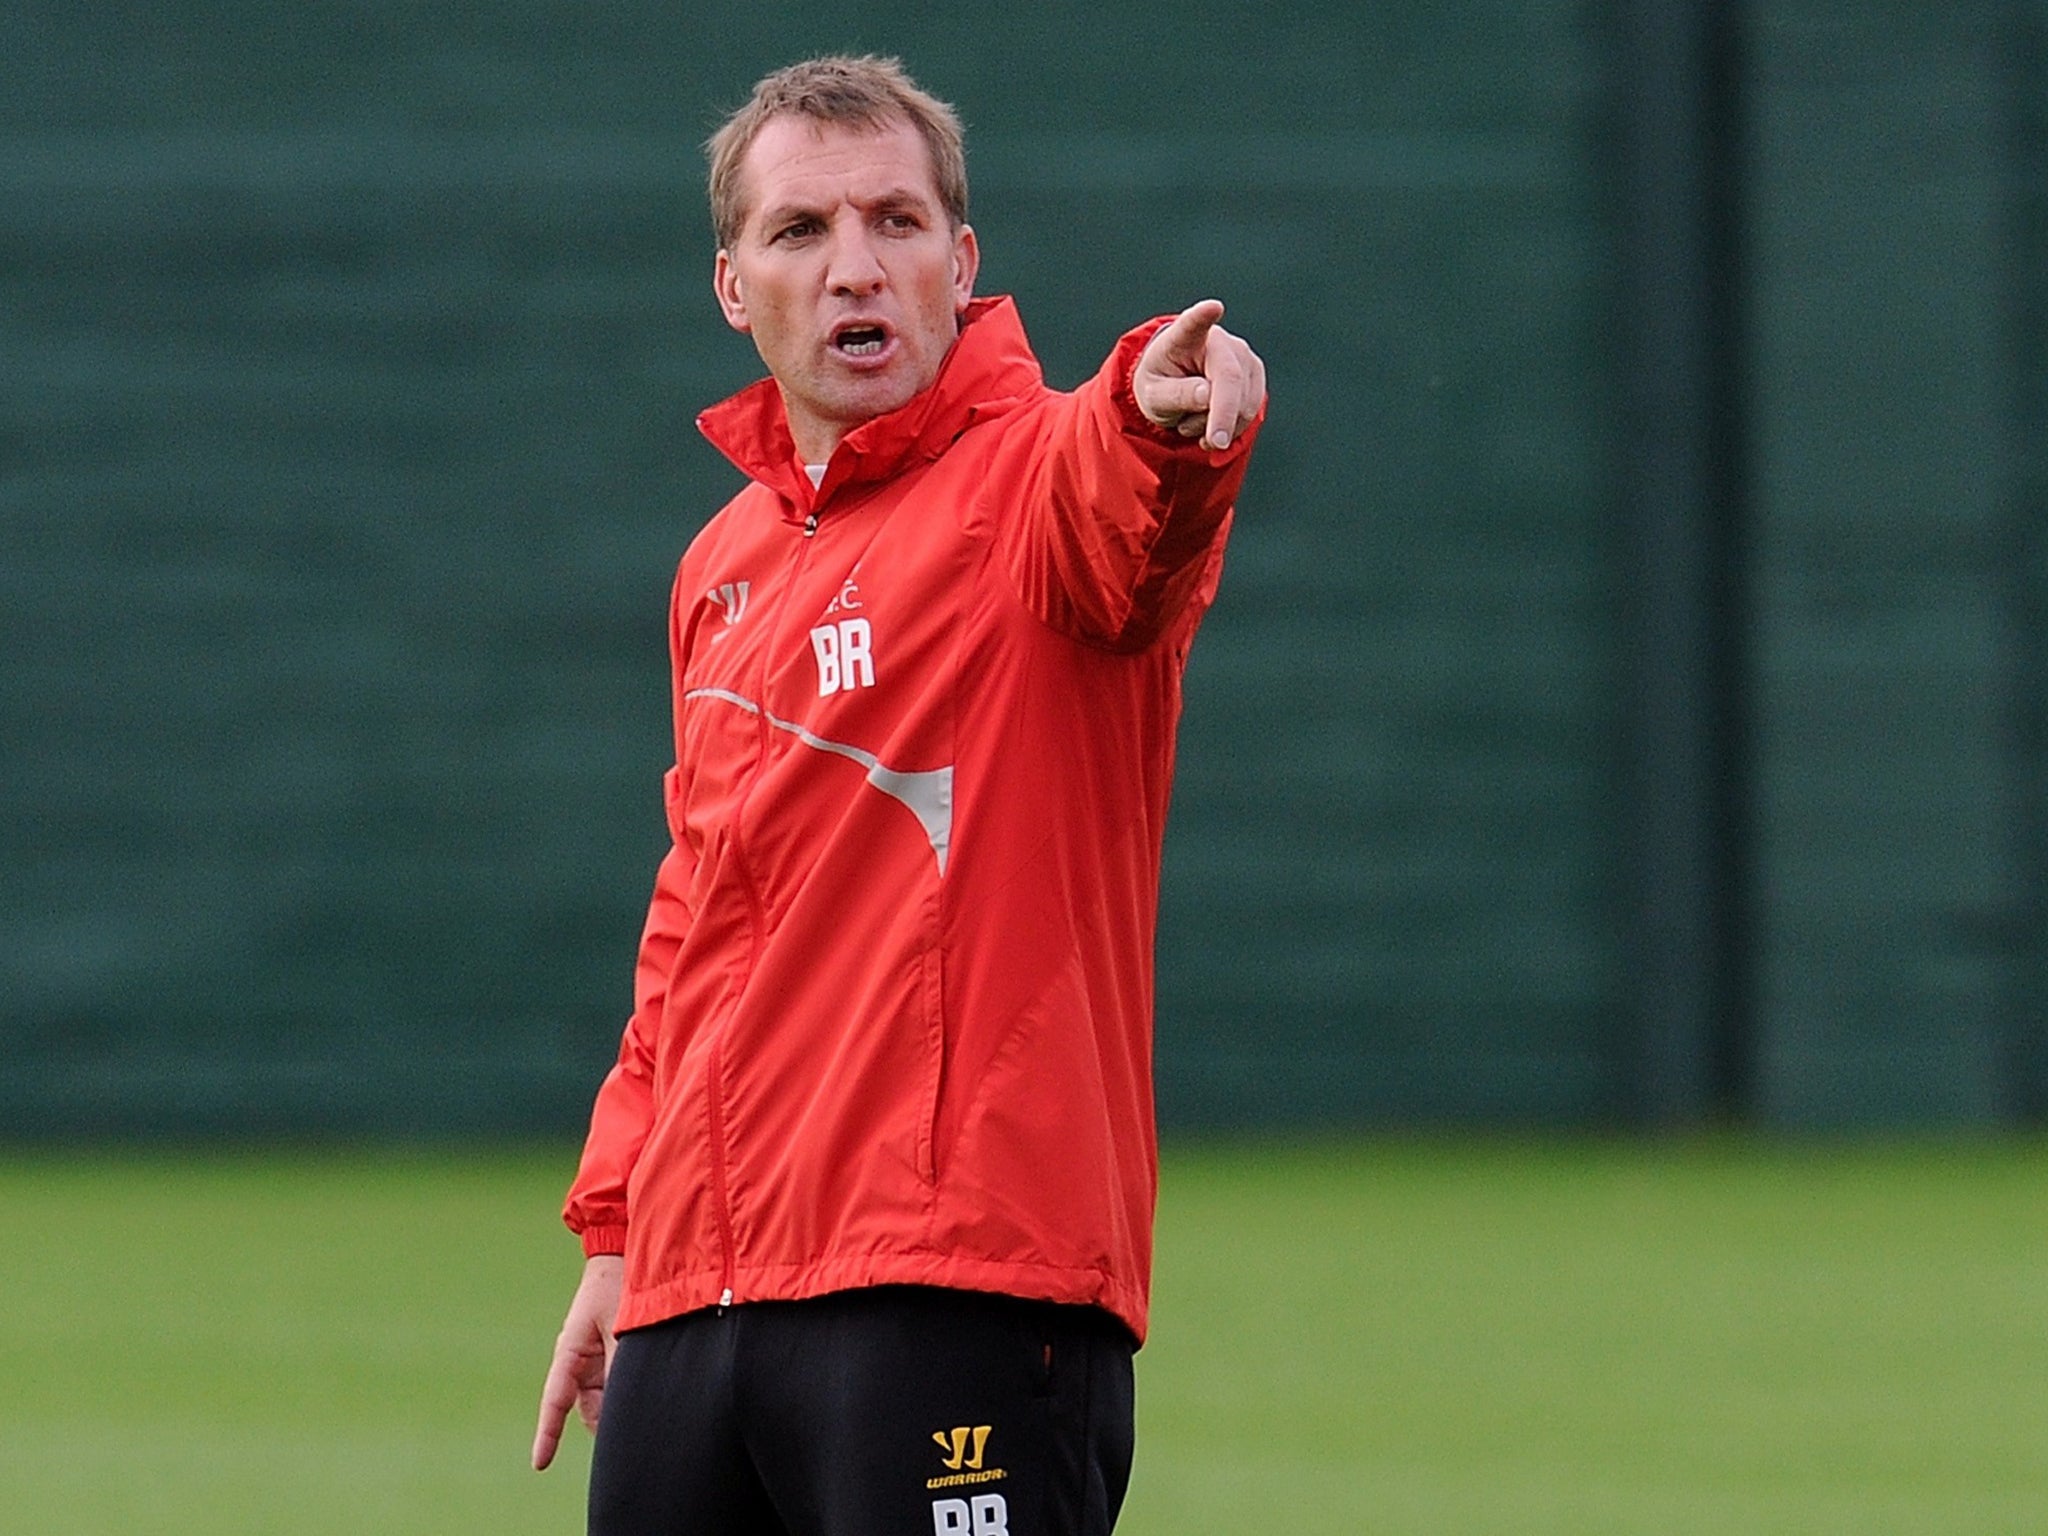 Liverpool’s Brendan Rodgers says he has received support from the club chairman for his decision to play a weakened team